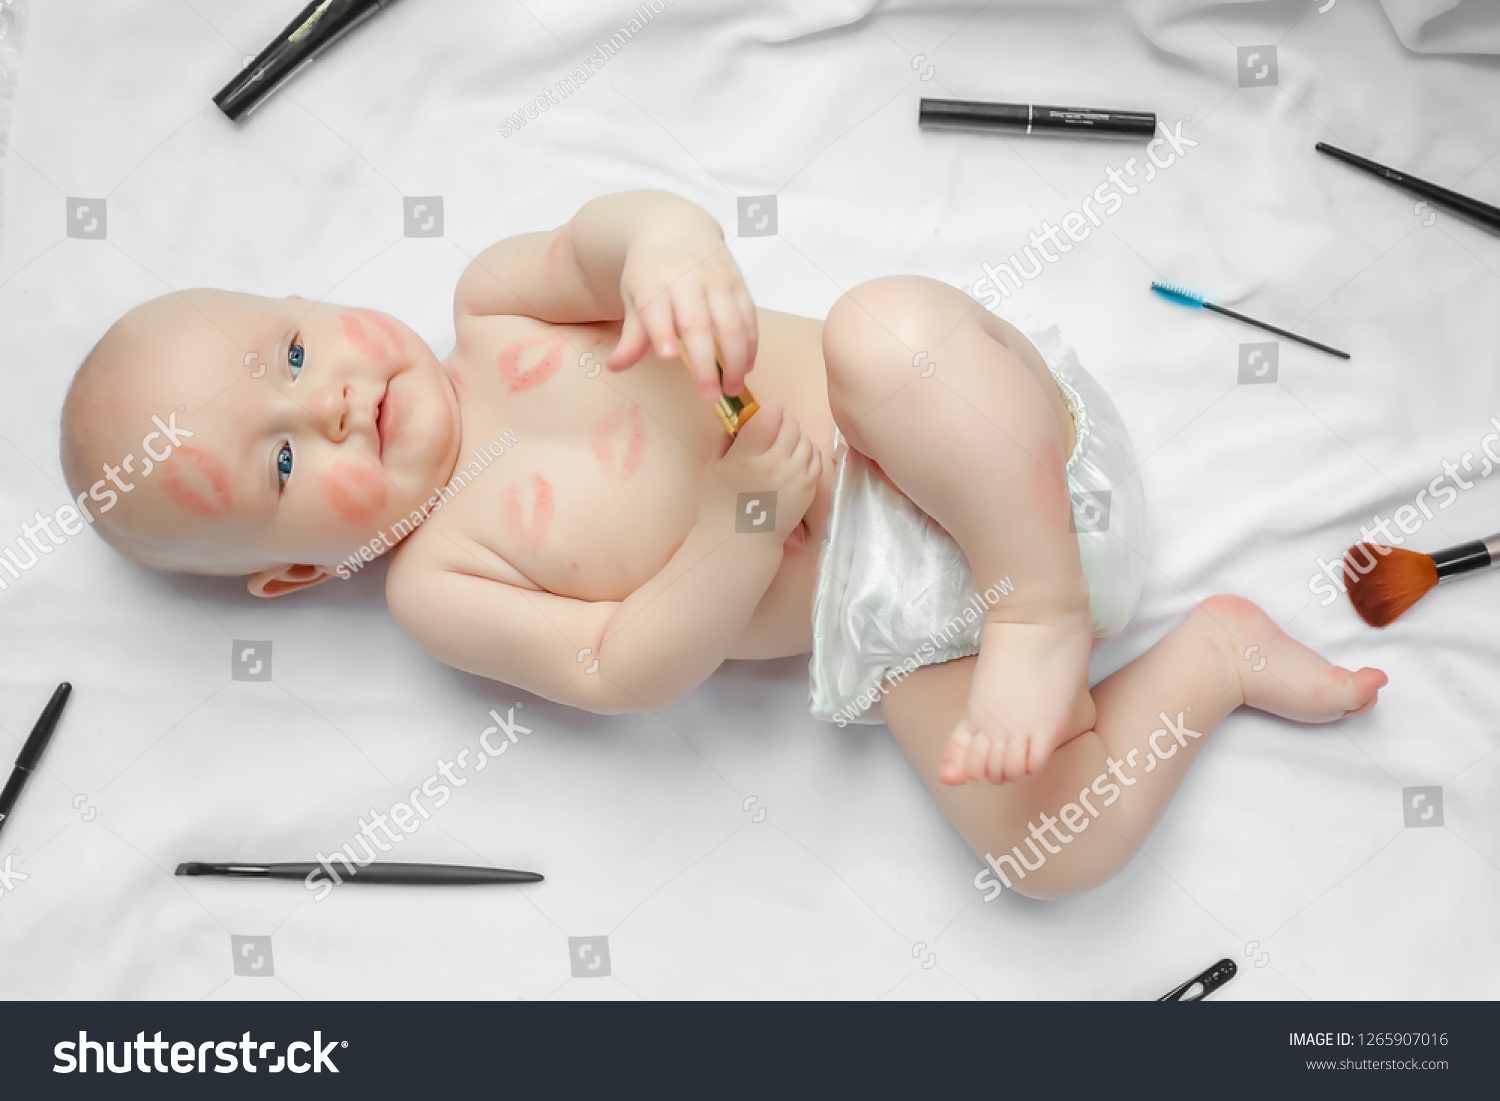 Cute happy newborn baby with red lipstick kisses on the skin with scattered makeup tools on white background. top view. #1265907016